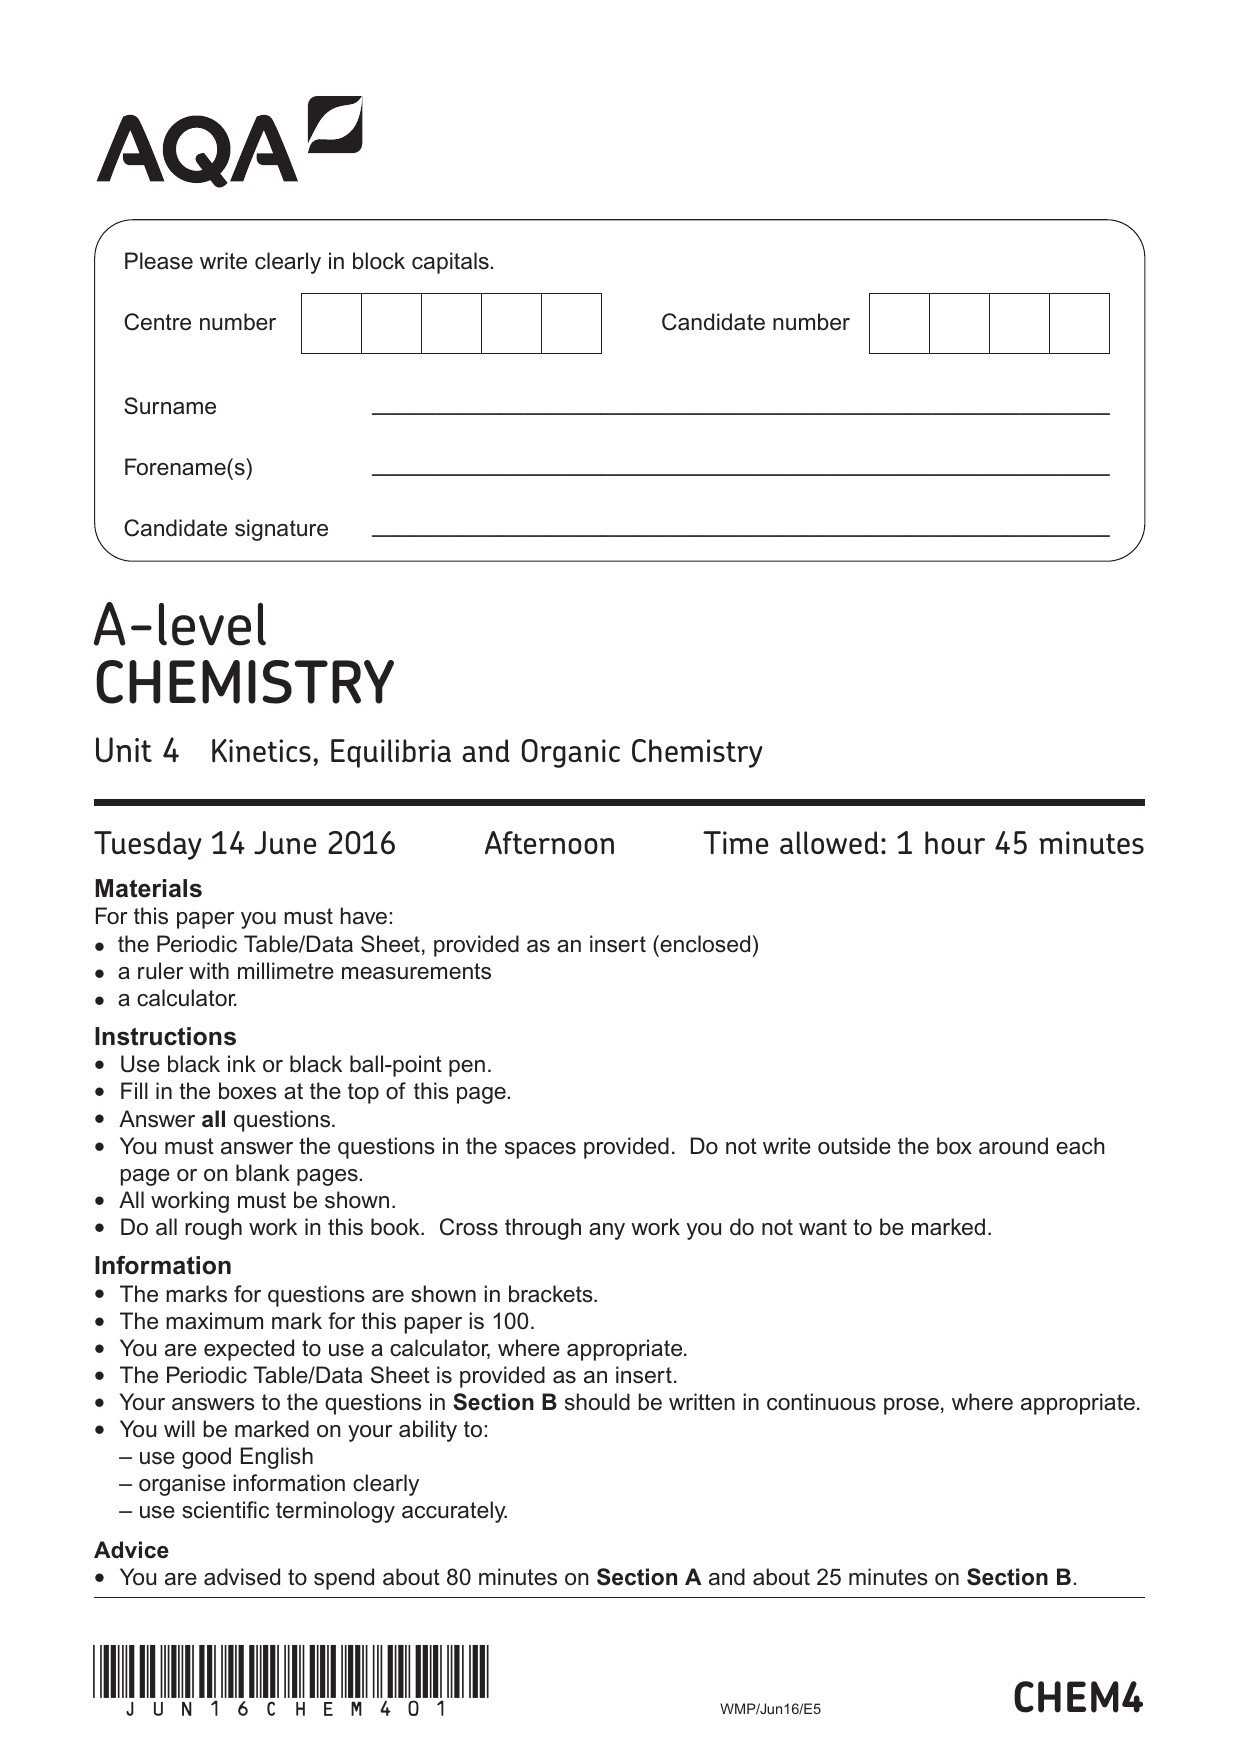 Chemistry Data Analysis Worksheets Also Periodic Table Data Sheet Fresh Re Anager Re Enager Cover Letter